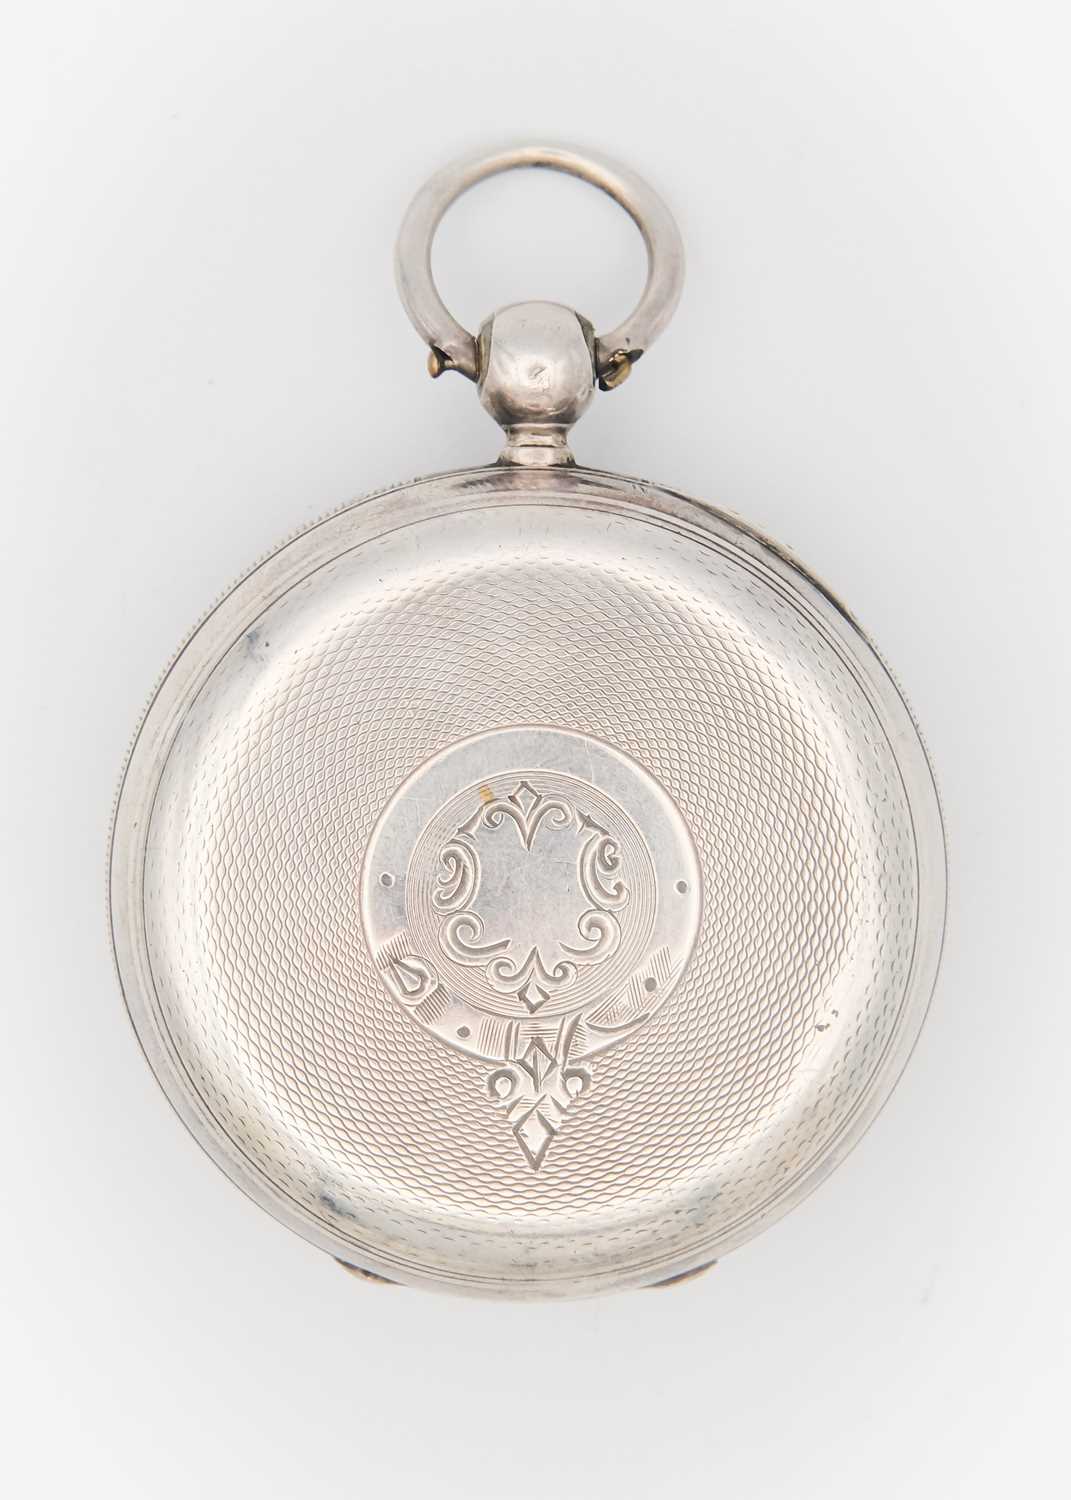 A silver-cased key wind pocket lever watch. - Image 3 of 6